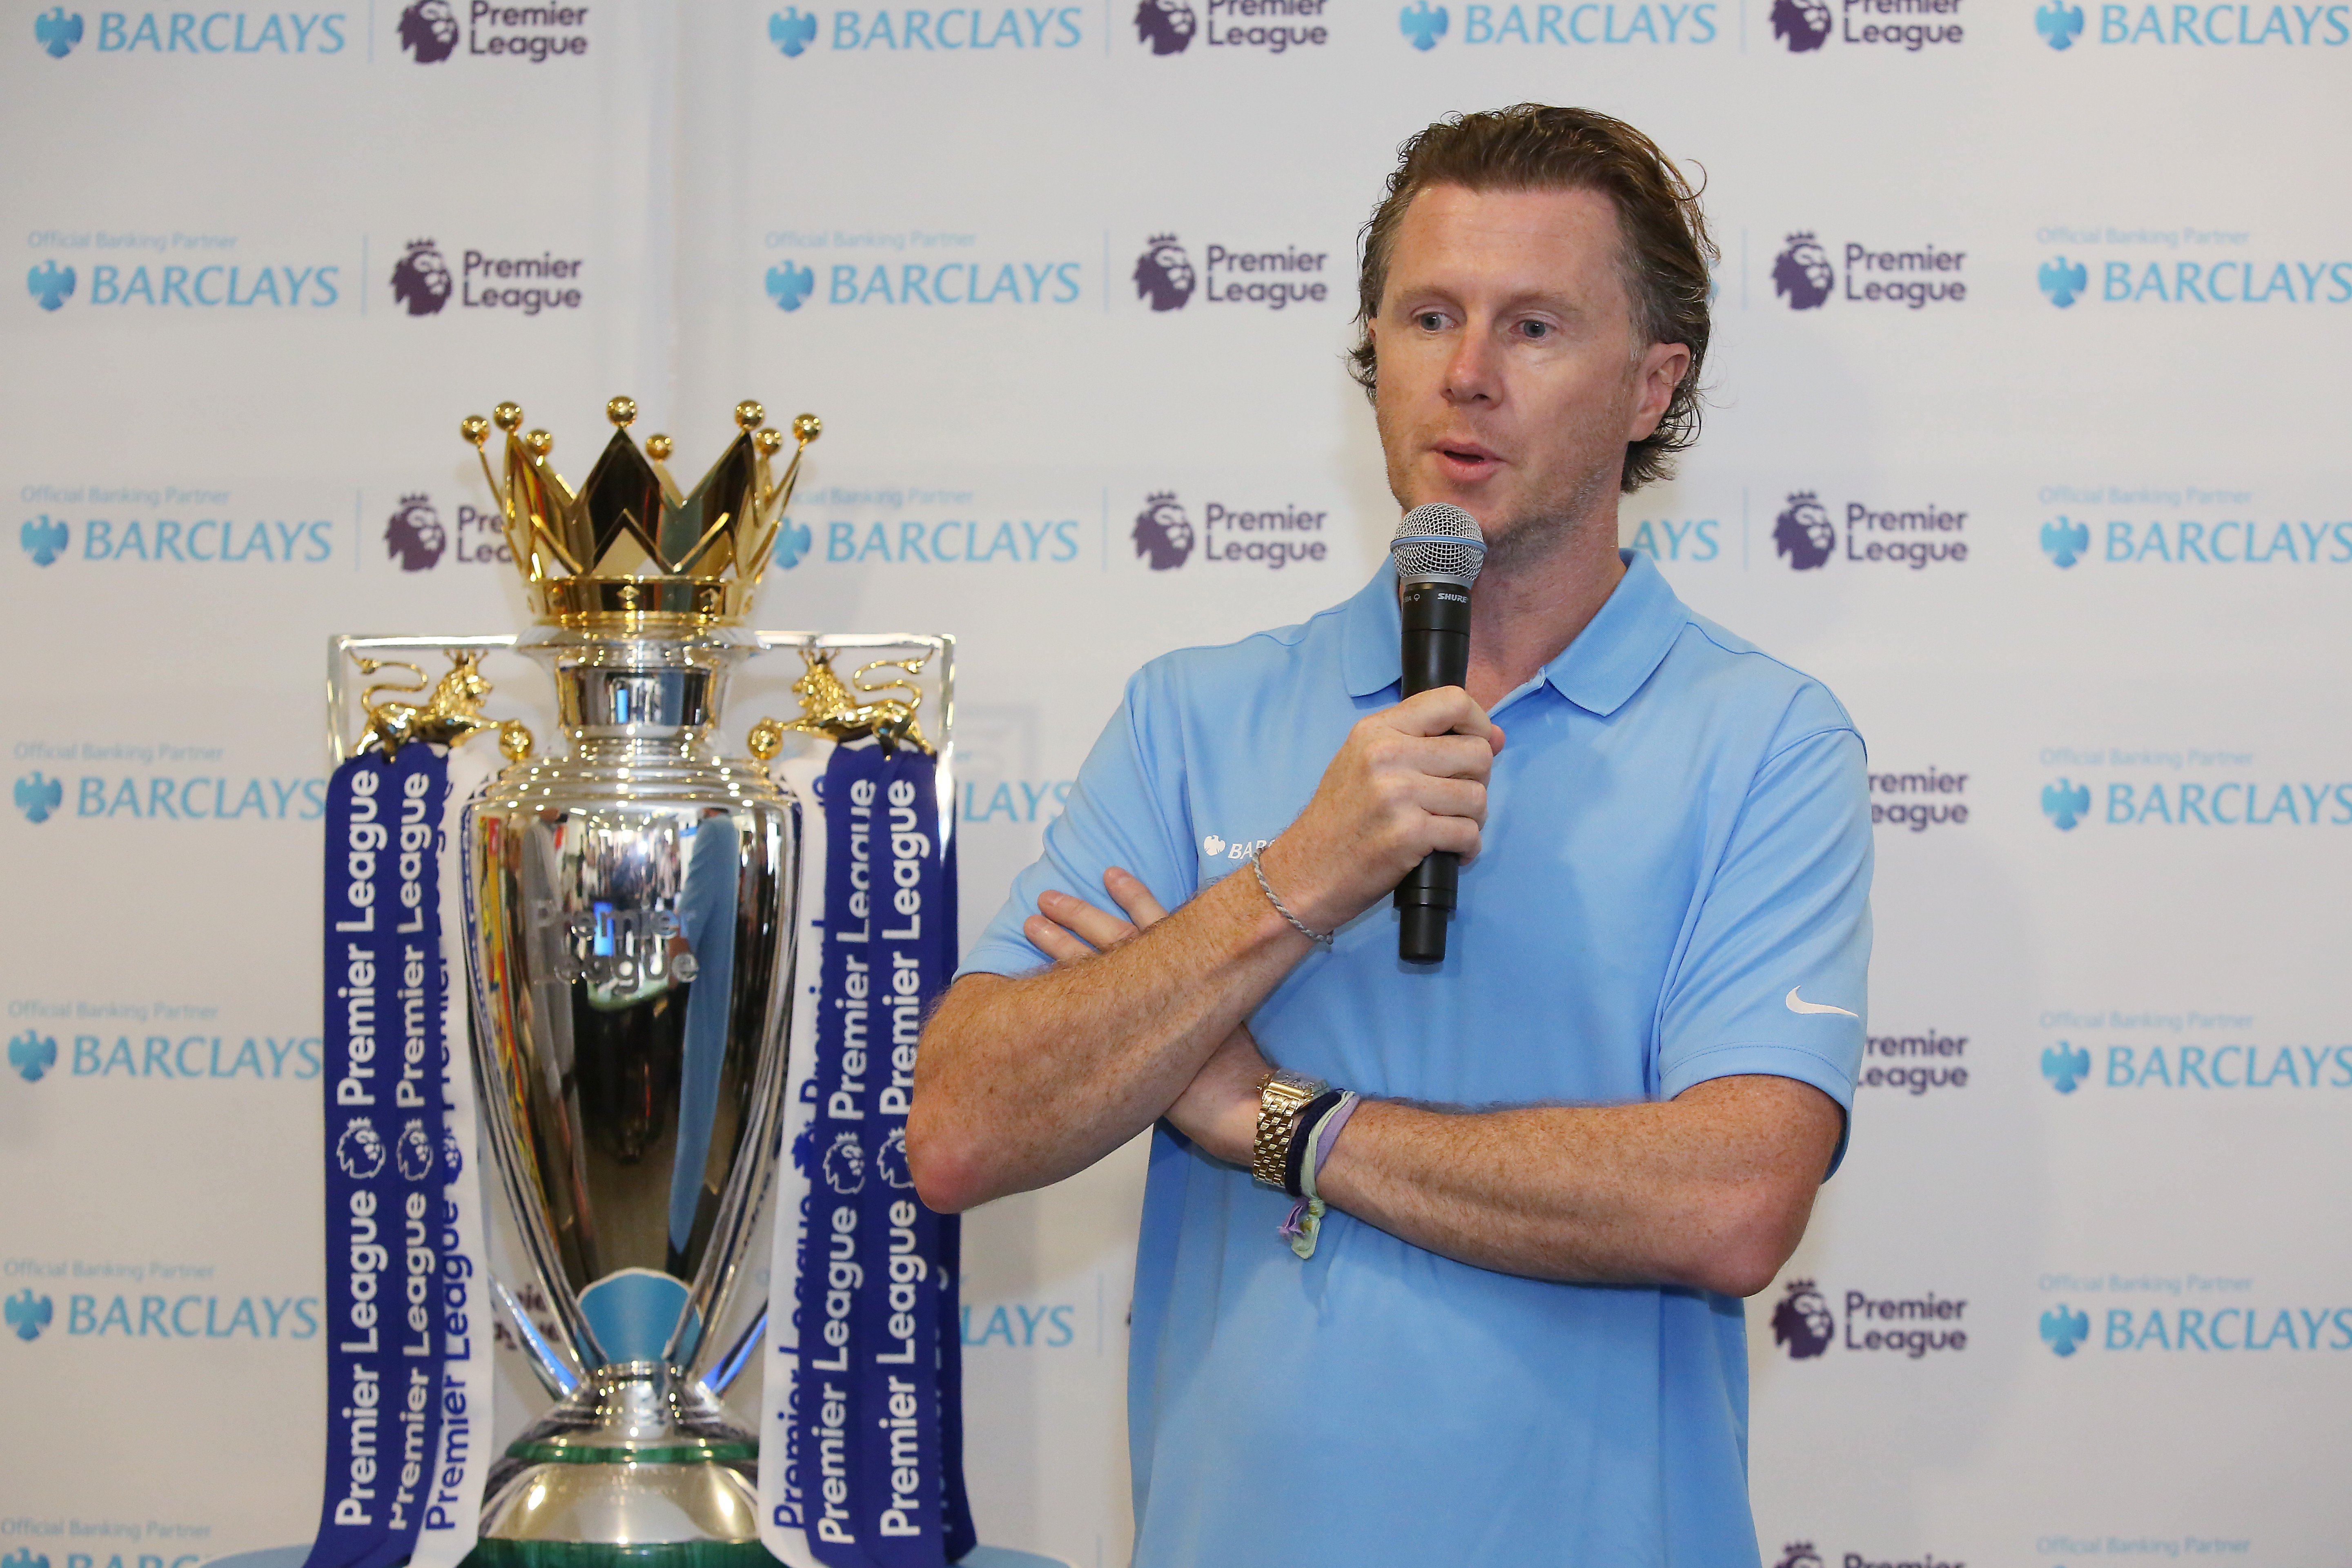 Steve McManaman with the Premier League trophy at a function with Barclays at the South China Morning Post offices in Causeway Bay. Photo: Edmond So